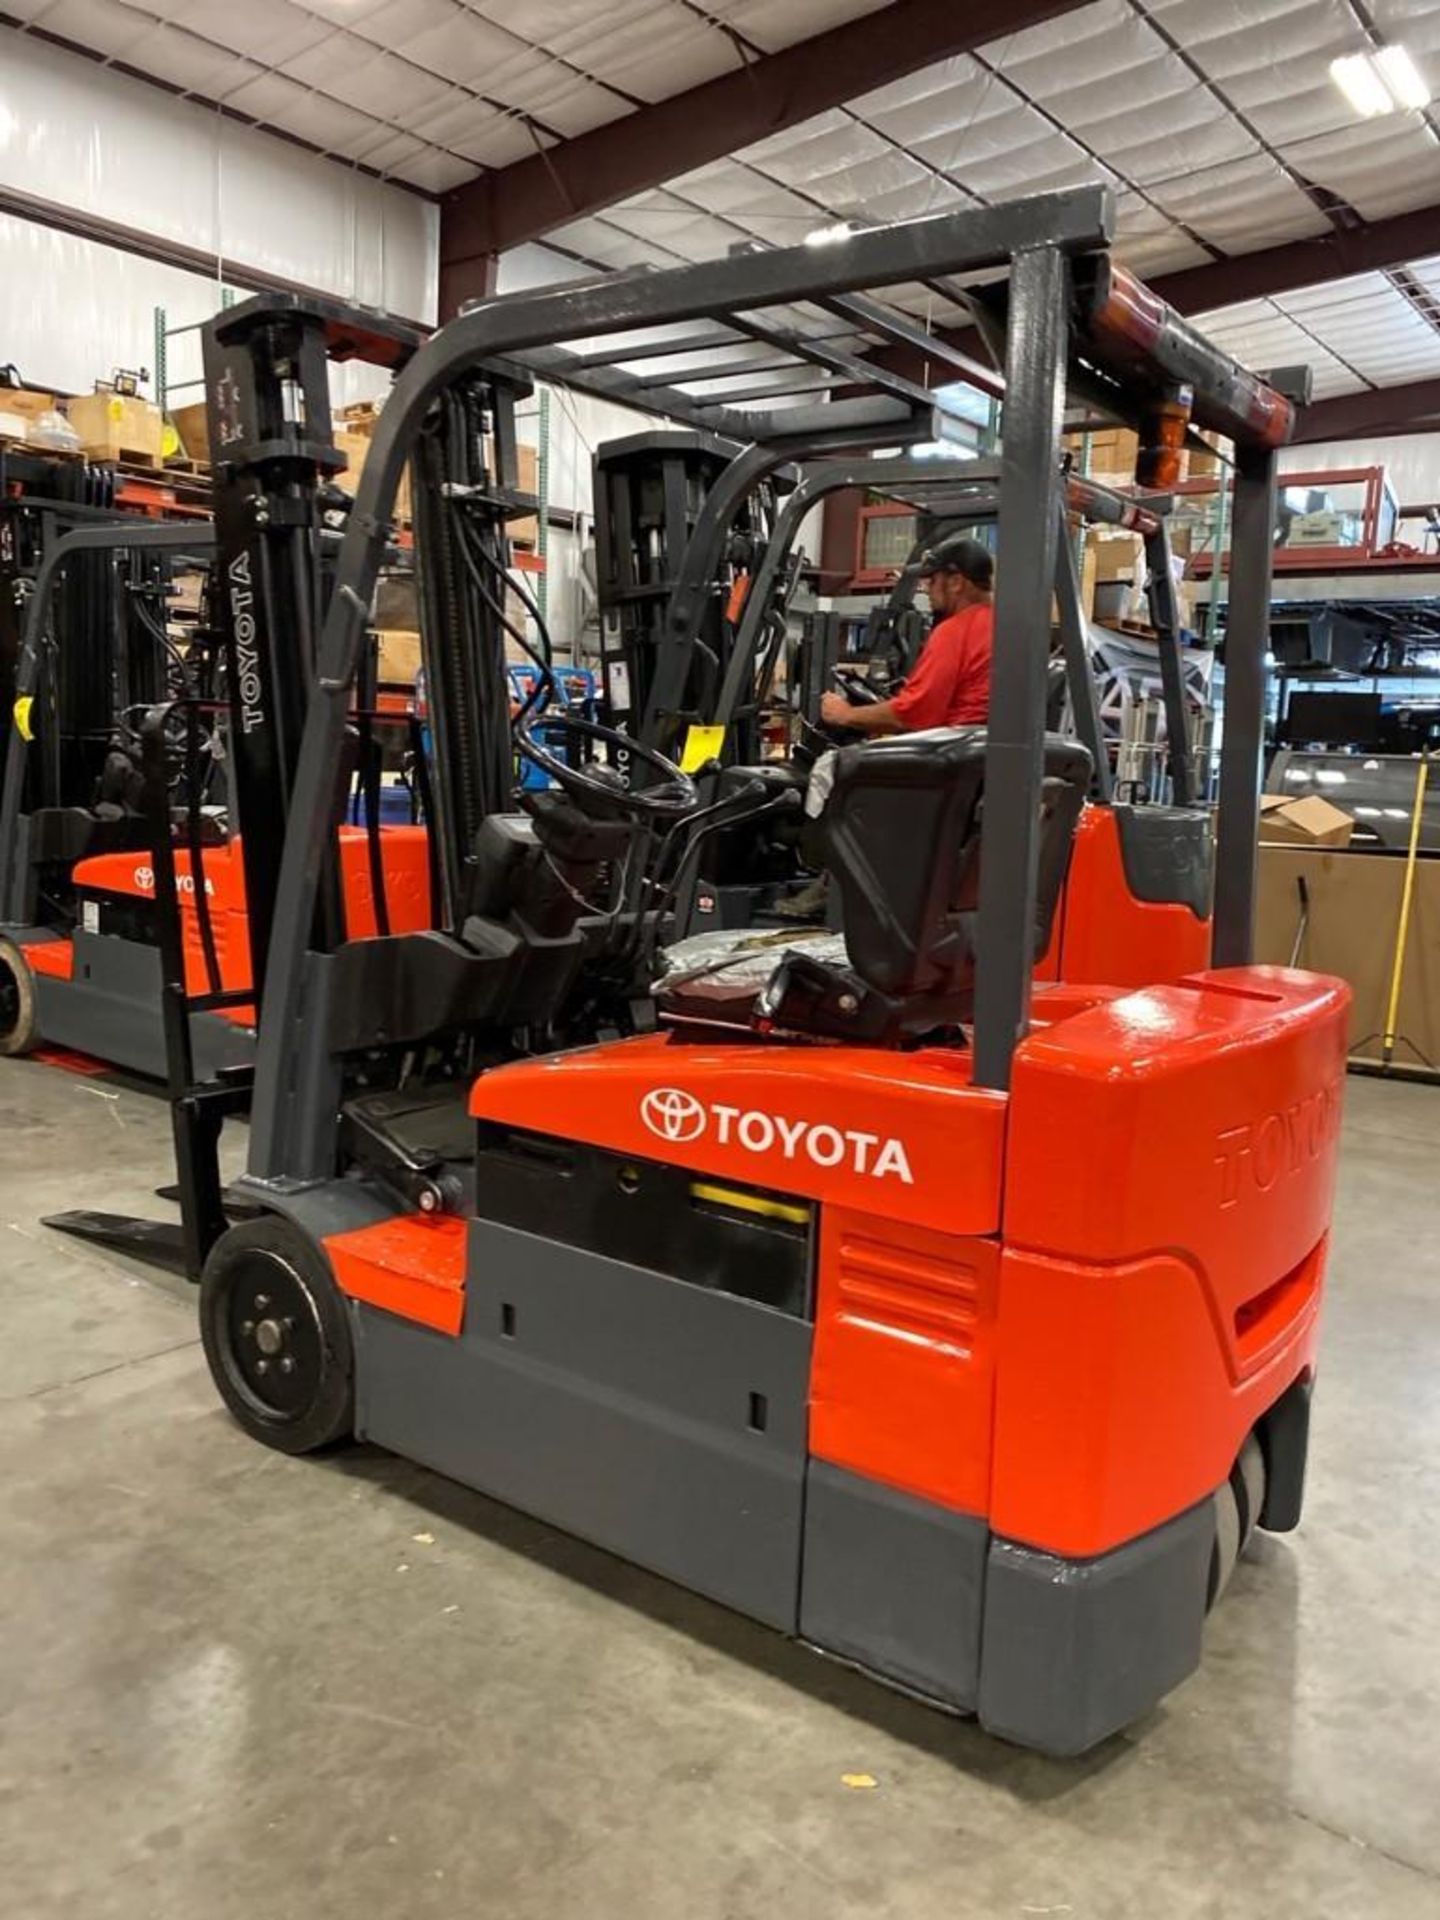 2014 TOYOTA ELECTRIC FORKLIFT MODEL 7FBEU20, APPROX 4,000 LB CAPACITY, 131.5" HEIGHT CAP, TILT, SIDE - Image 2 of 7